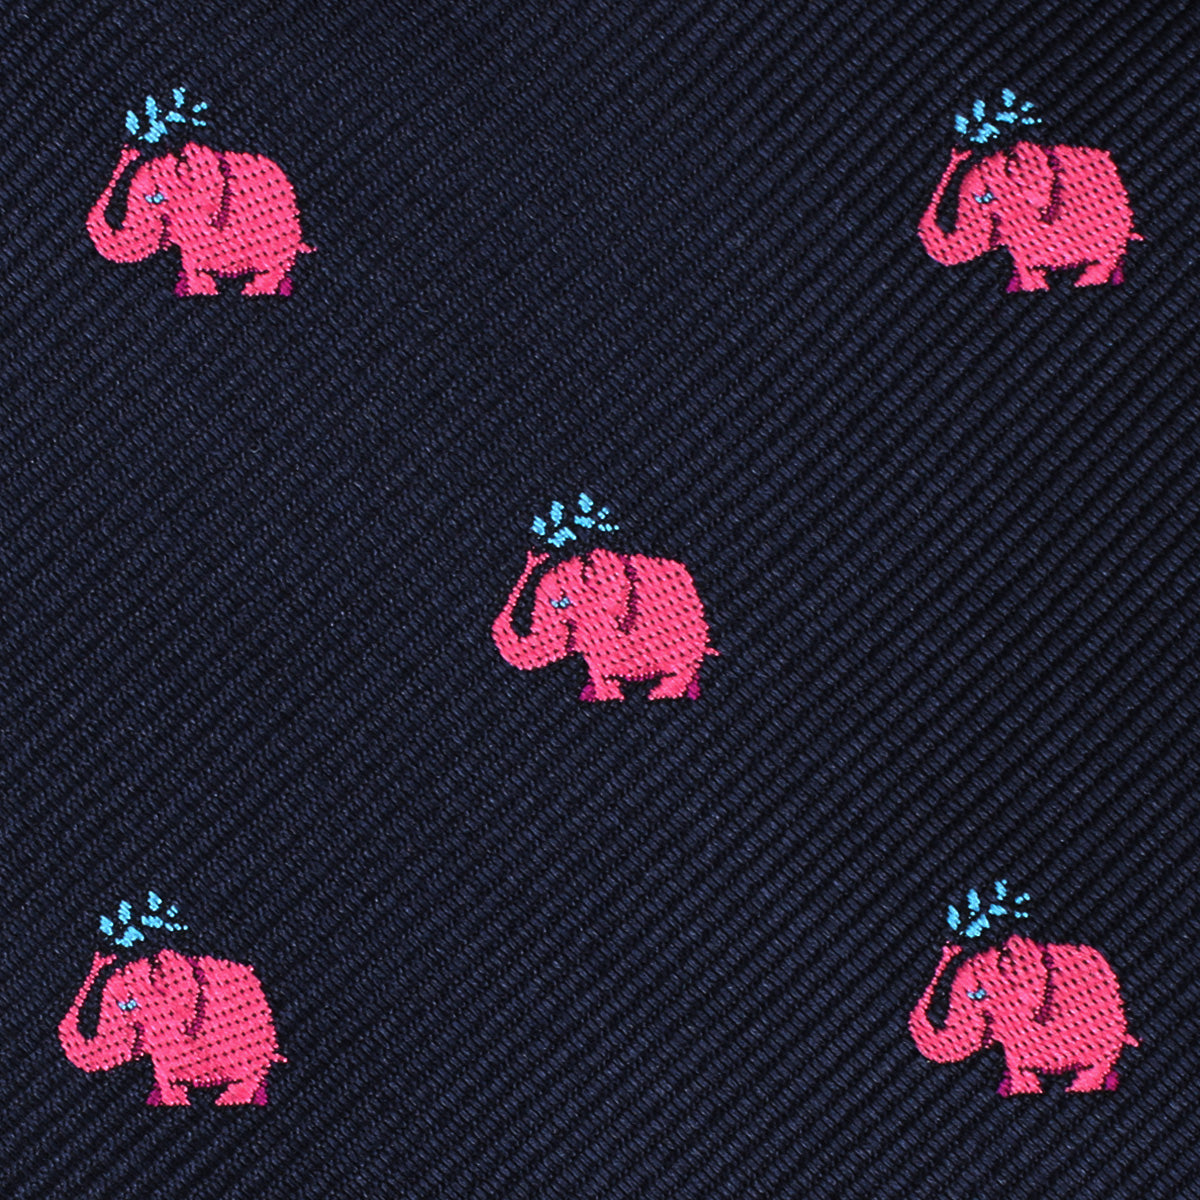 Pink Water Elephant Kids Bow Tie Fabric